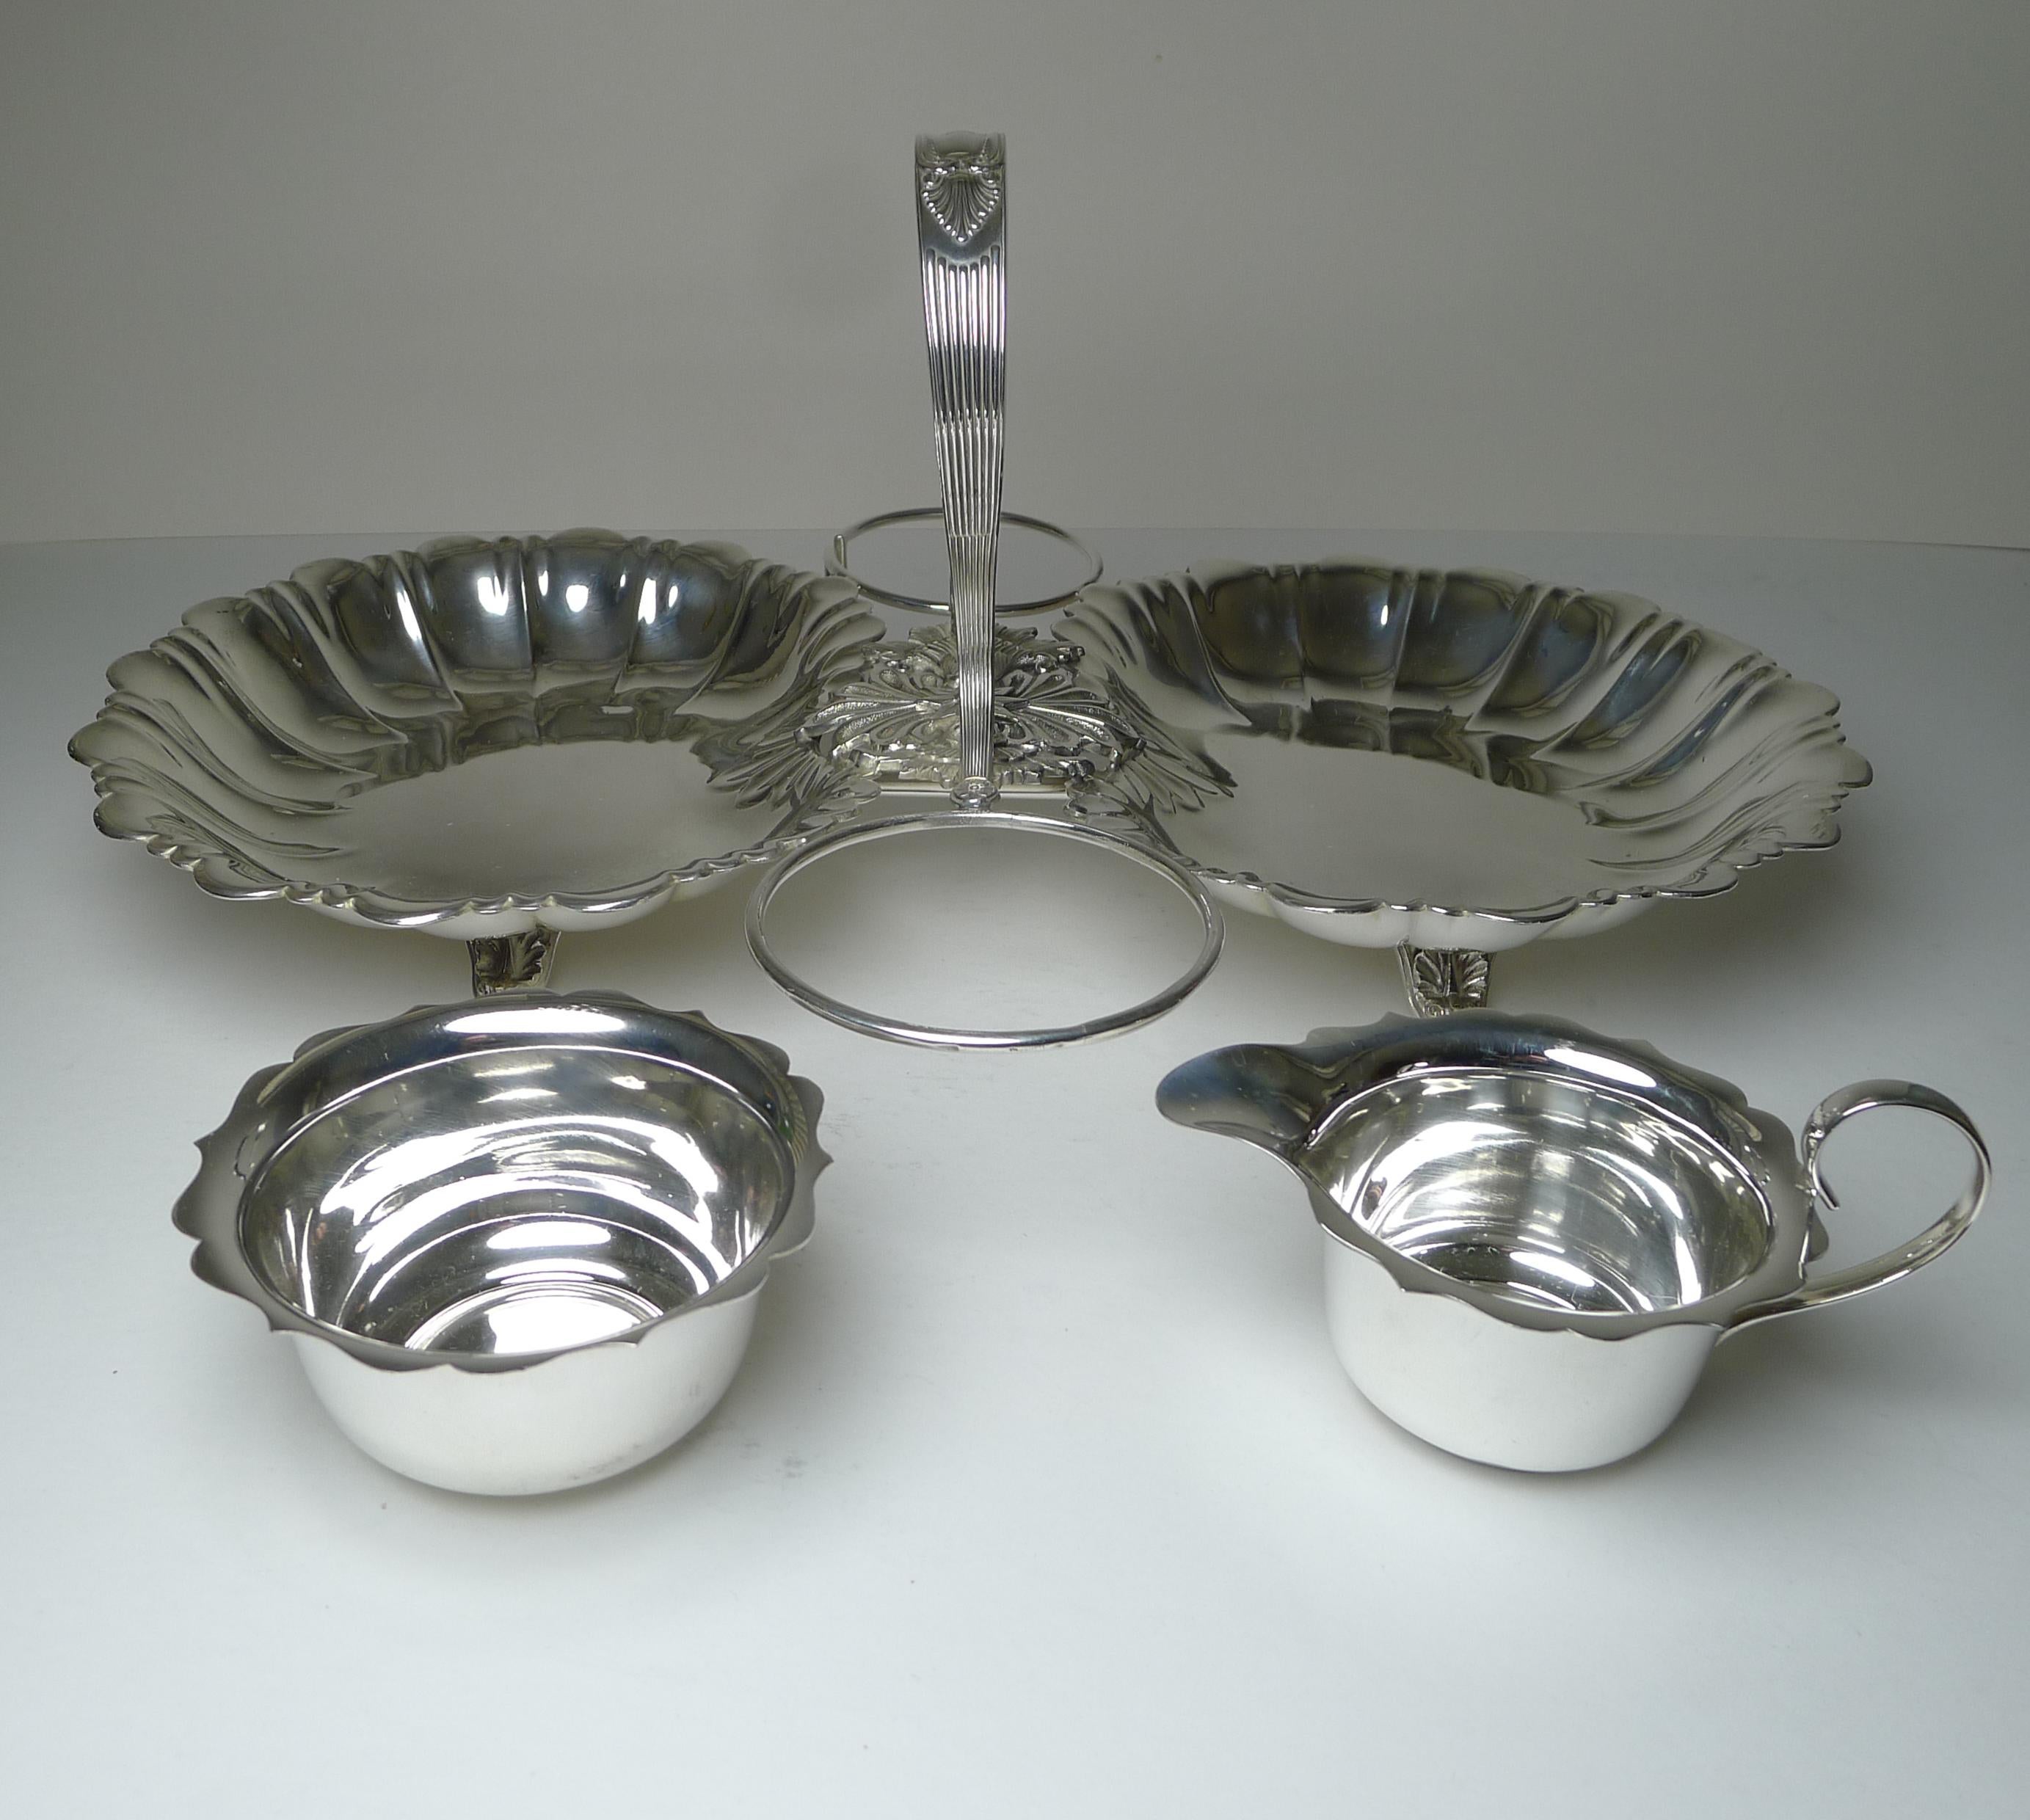 19th Century Antique English Silver Plated Strawberry Set by Walker & Hall, c.1895